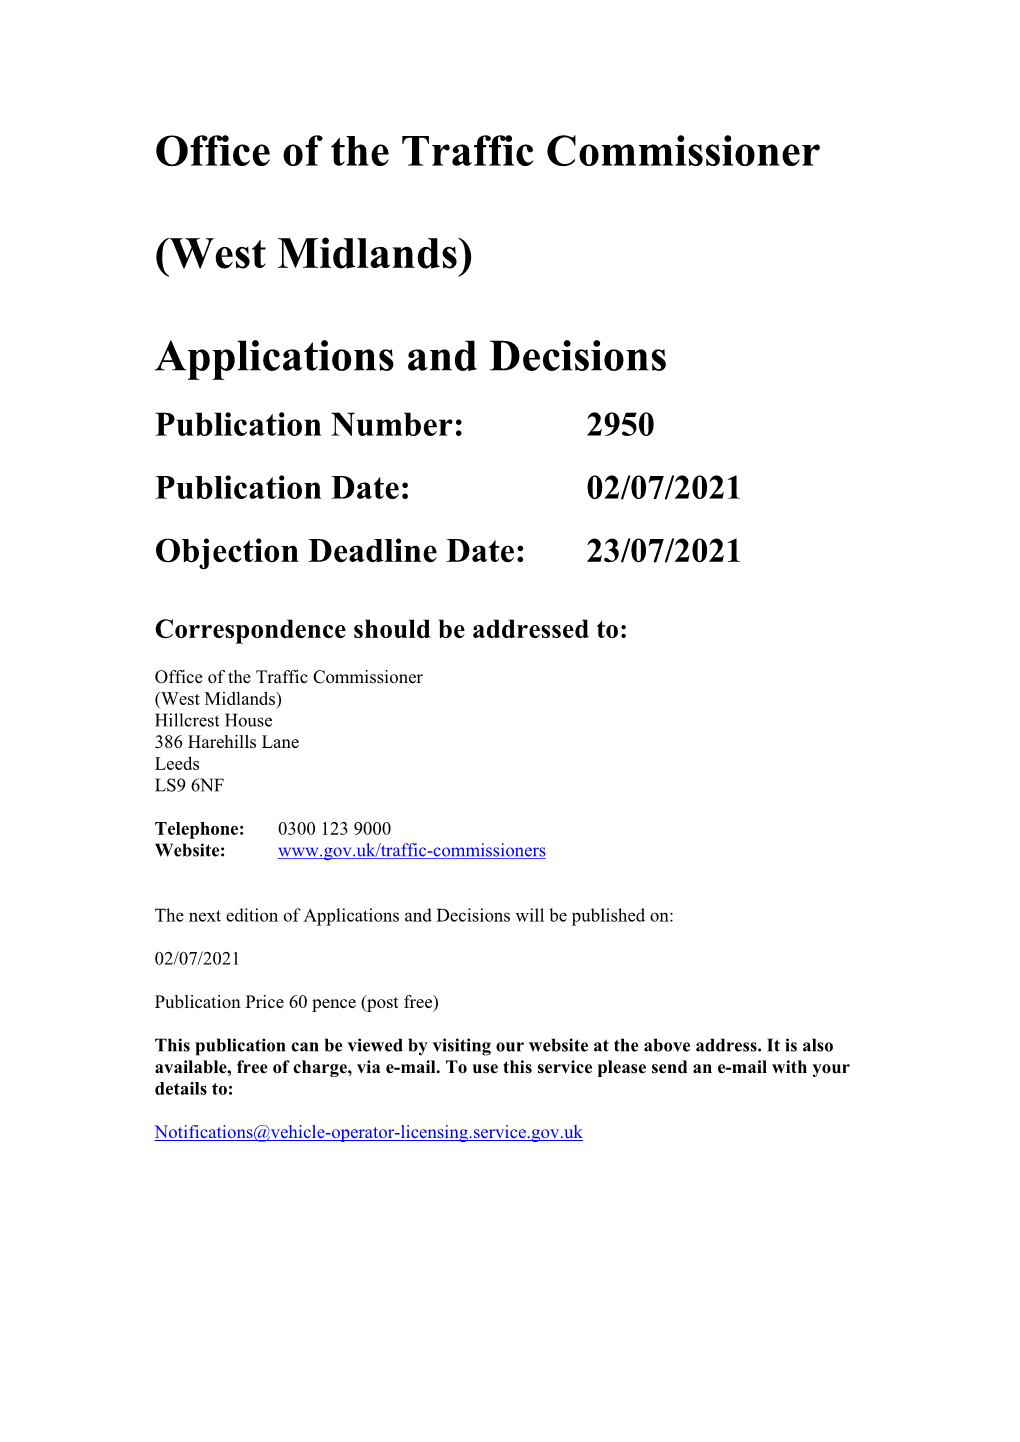 Office of the Traffic Commissioner (West Midlands) Applications and Decisions